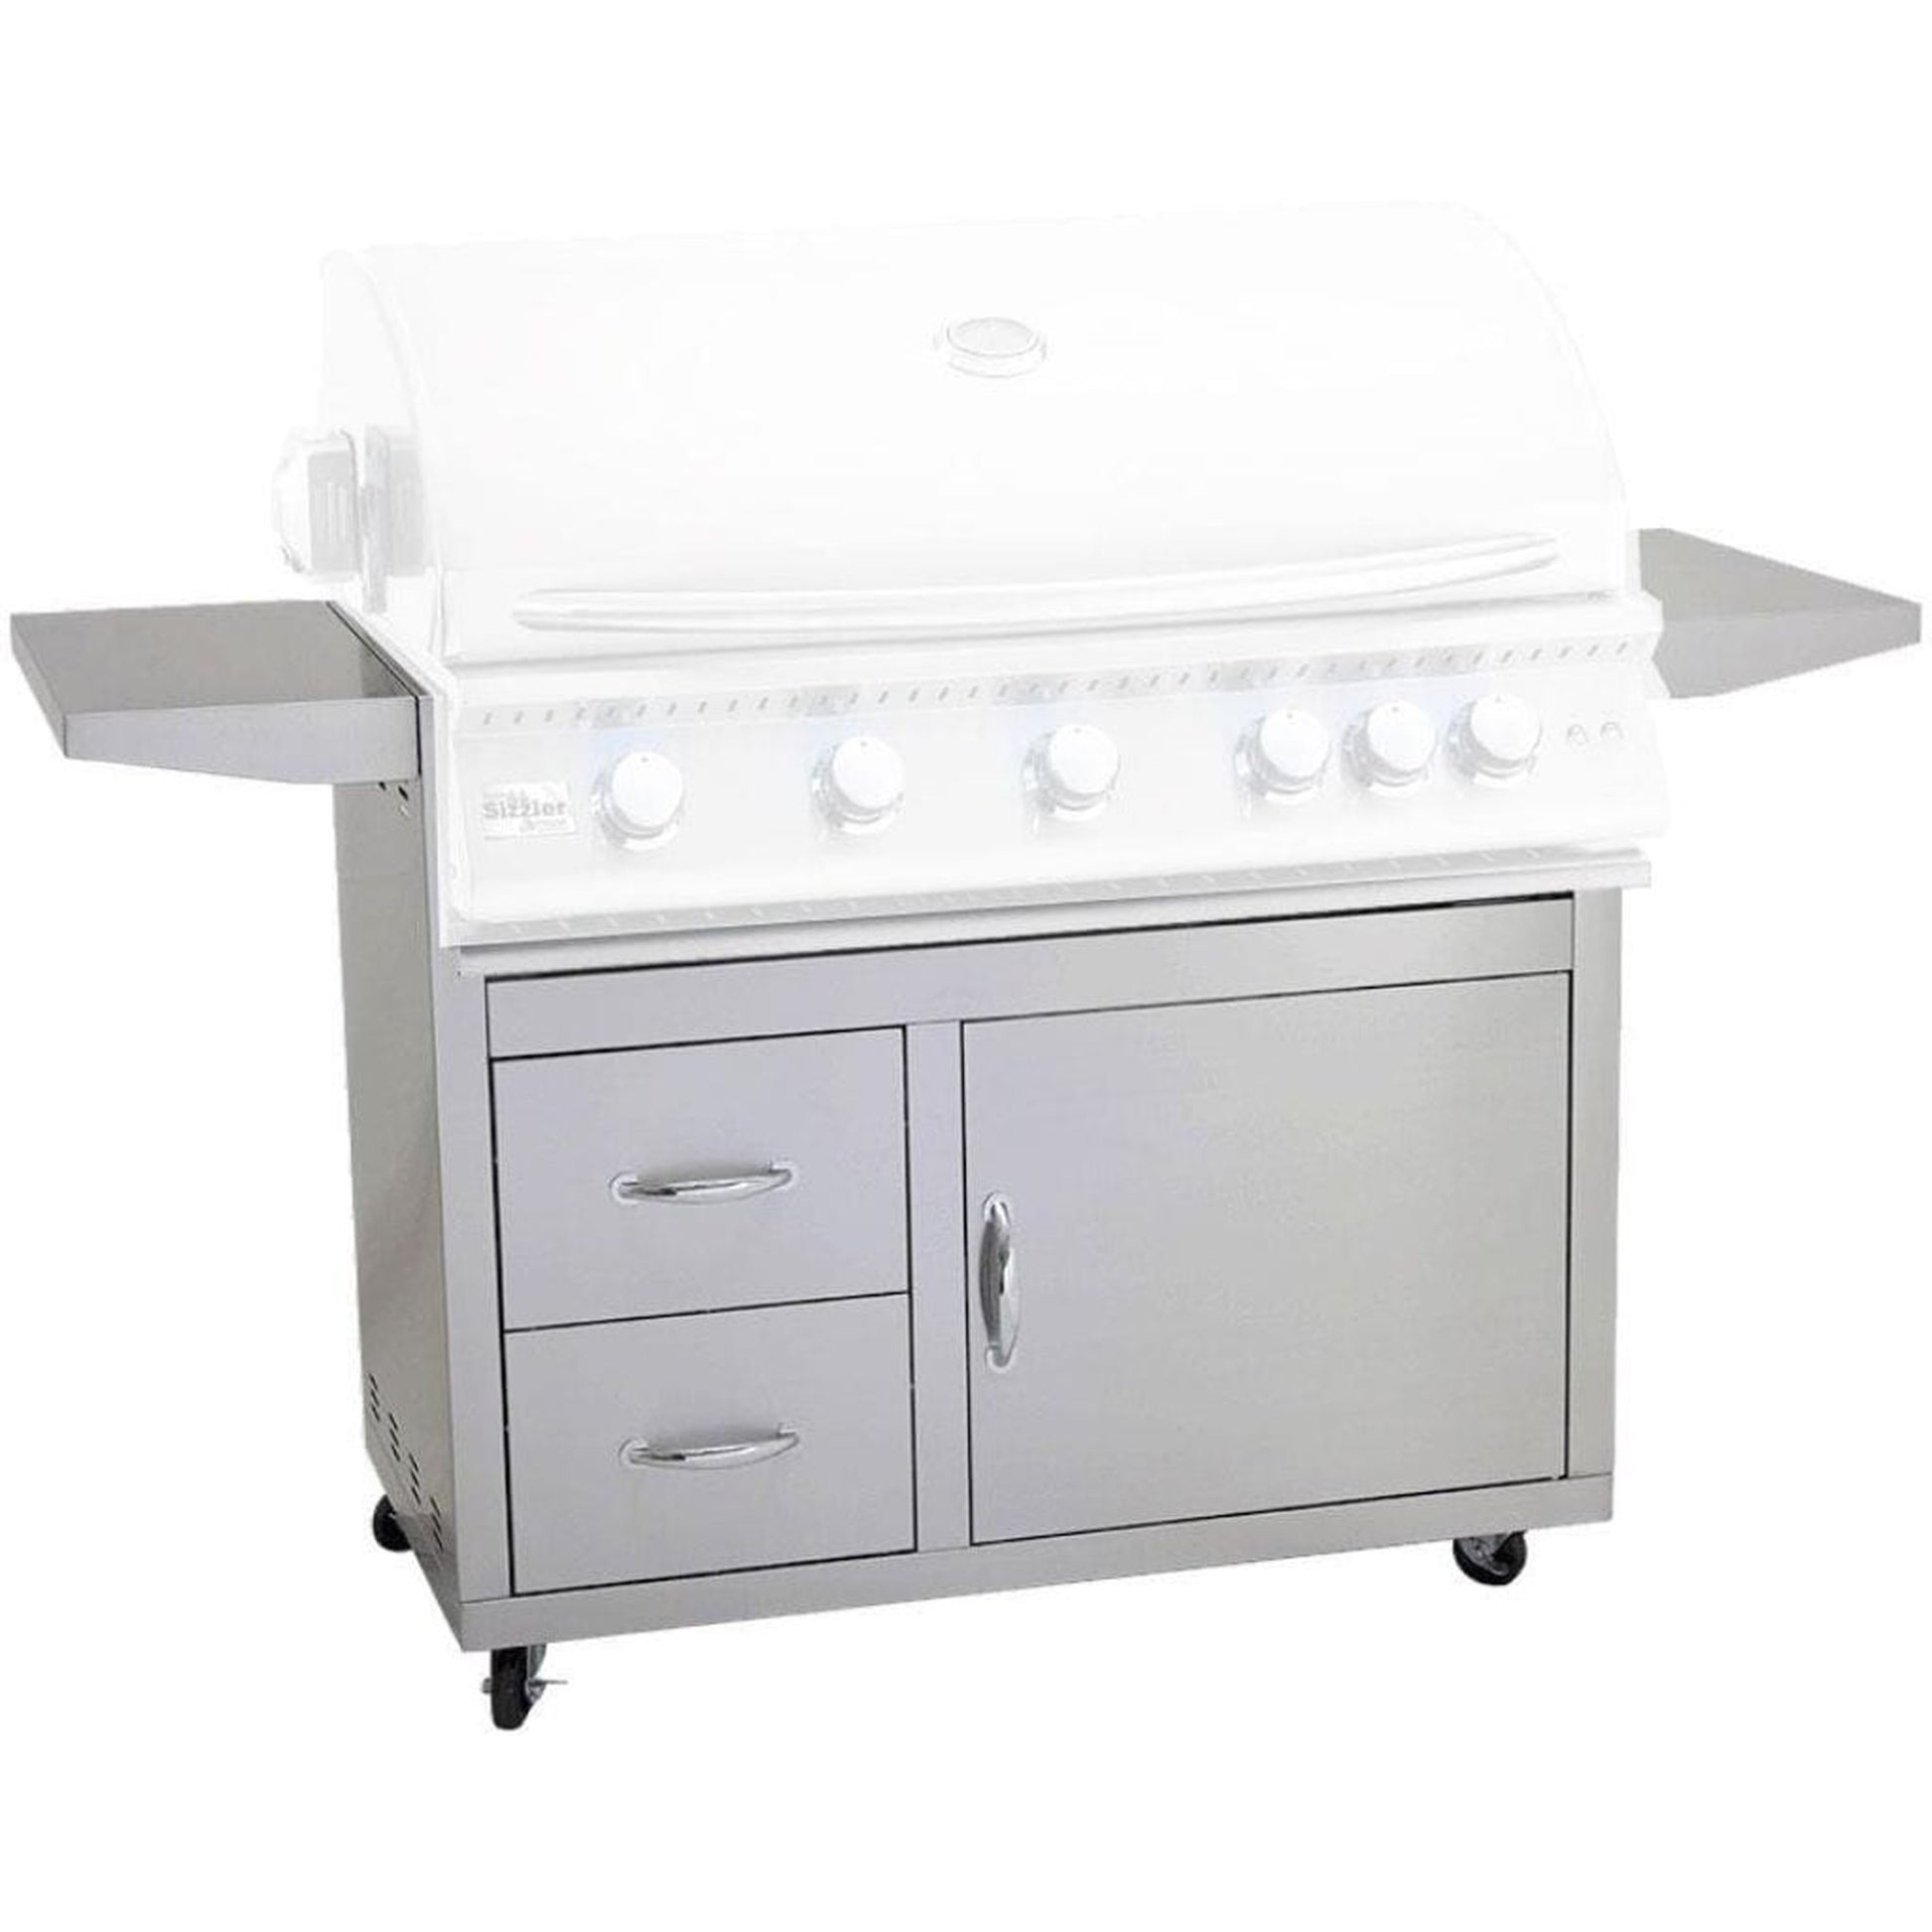 Summerset Fully Assembled Door & 2-Drawer Combo Grill Carts for Sizzler Series (Cart Only)